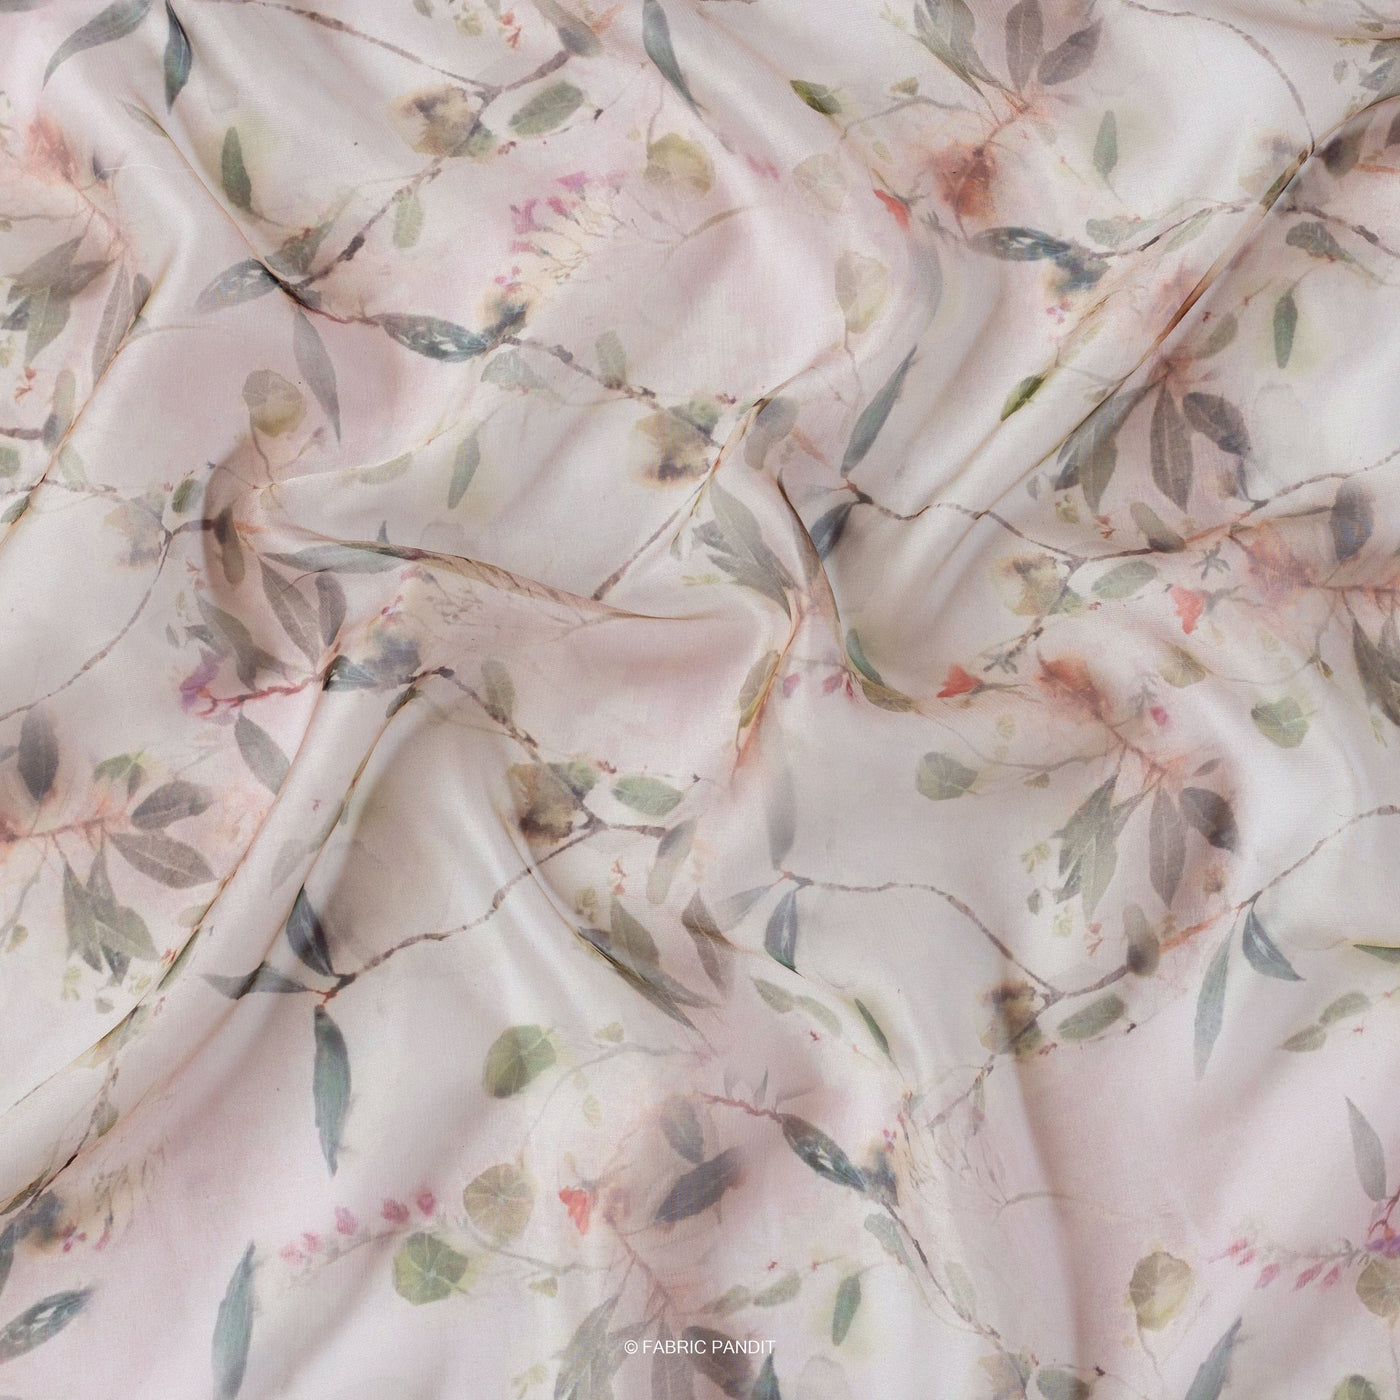 Fabric Pandit Fabric Light Peach Summer Leaves Digital Printed Taby silk Fabric (Width 44 Inches)